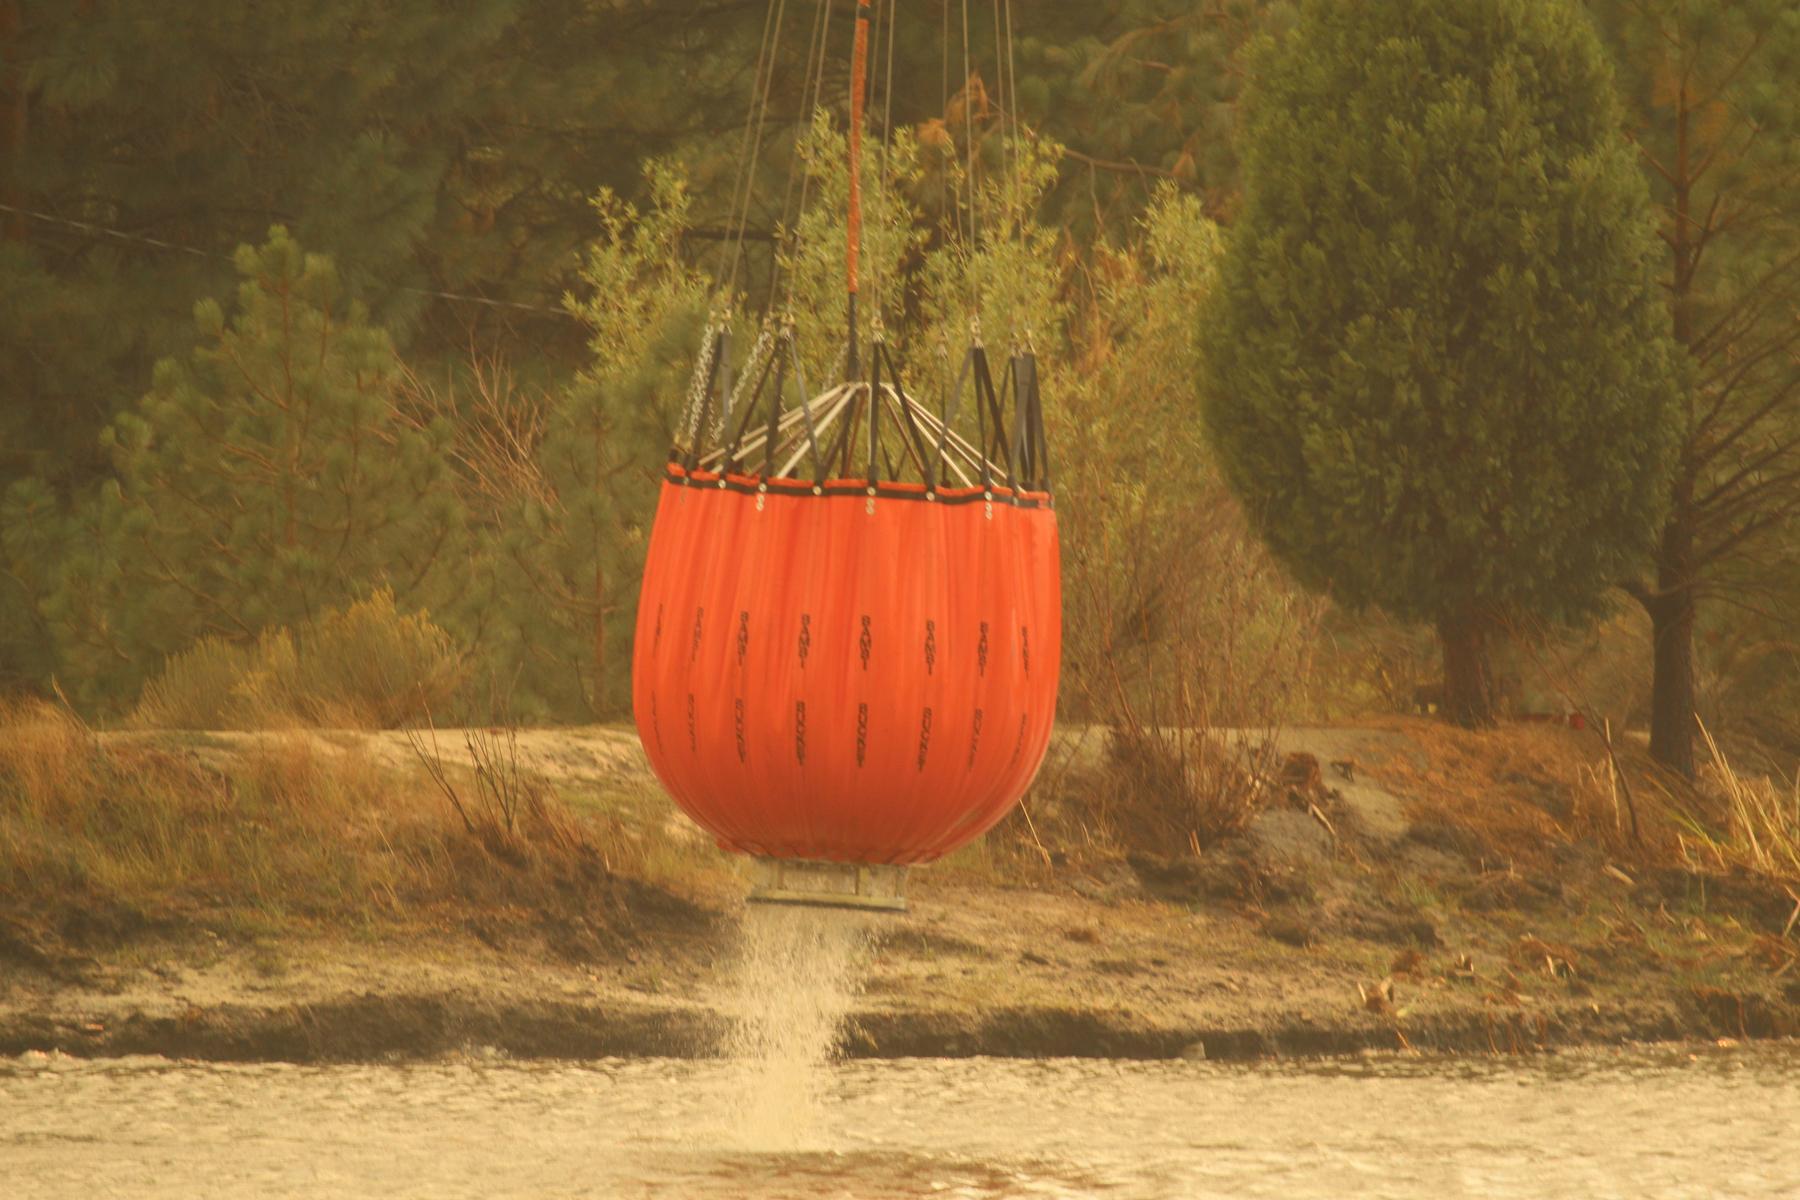 Sky Crane Helicopter Bucket Holds 1,000 Gallons. Photo: Mike McMillan - BIA